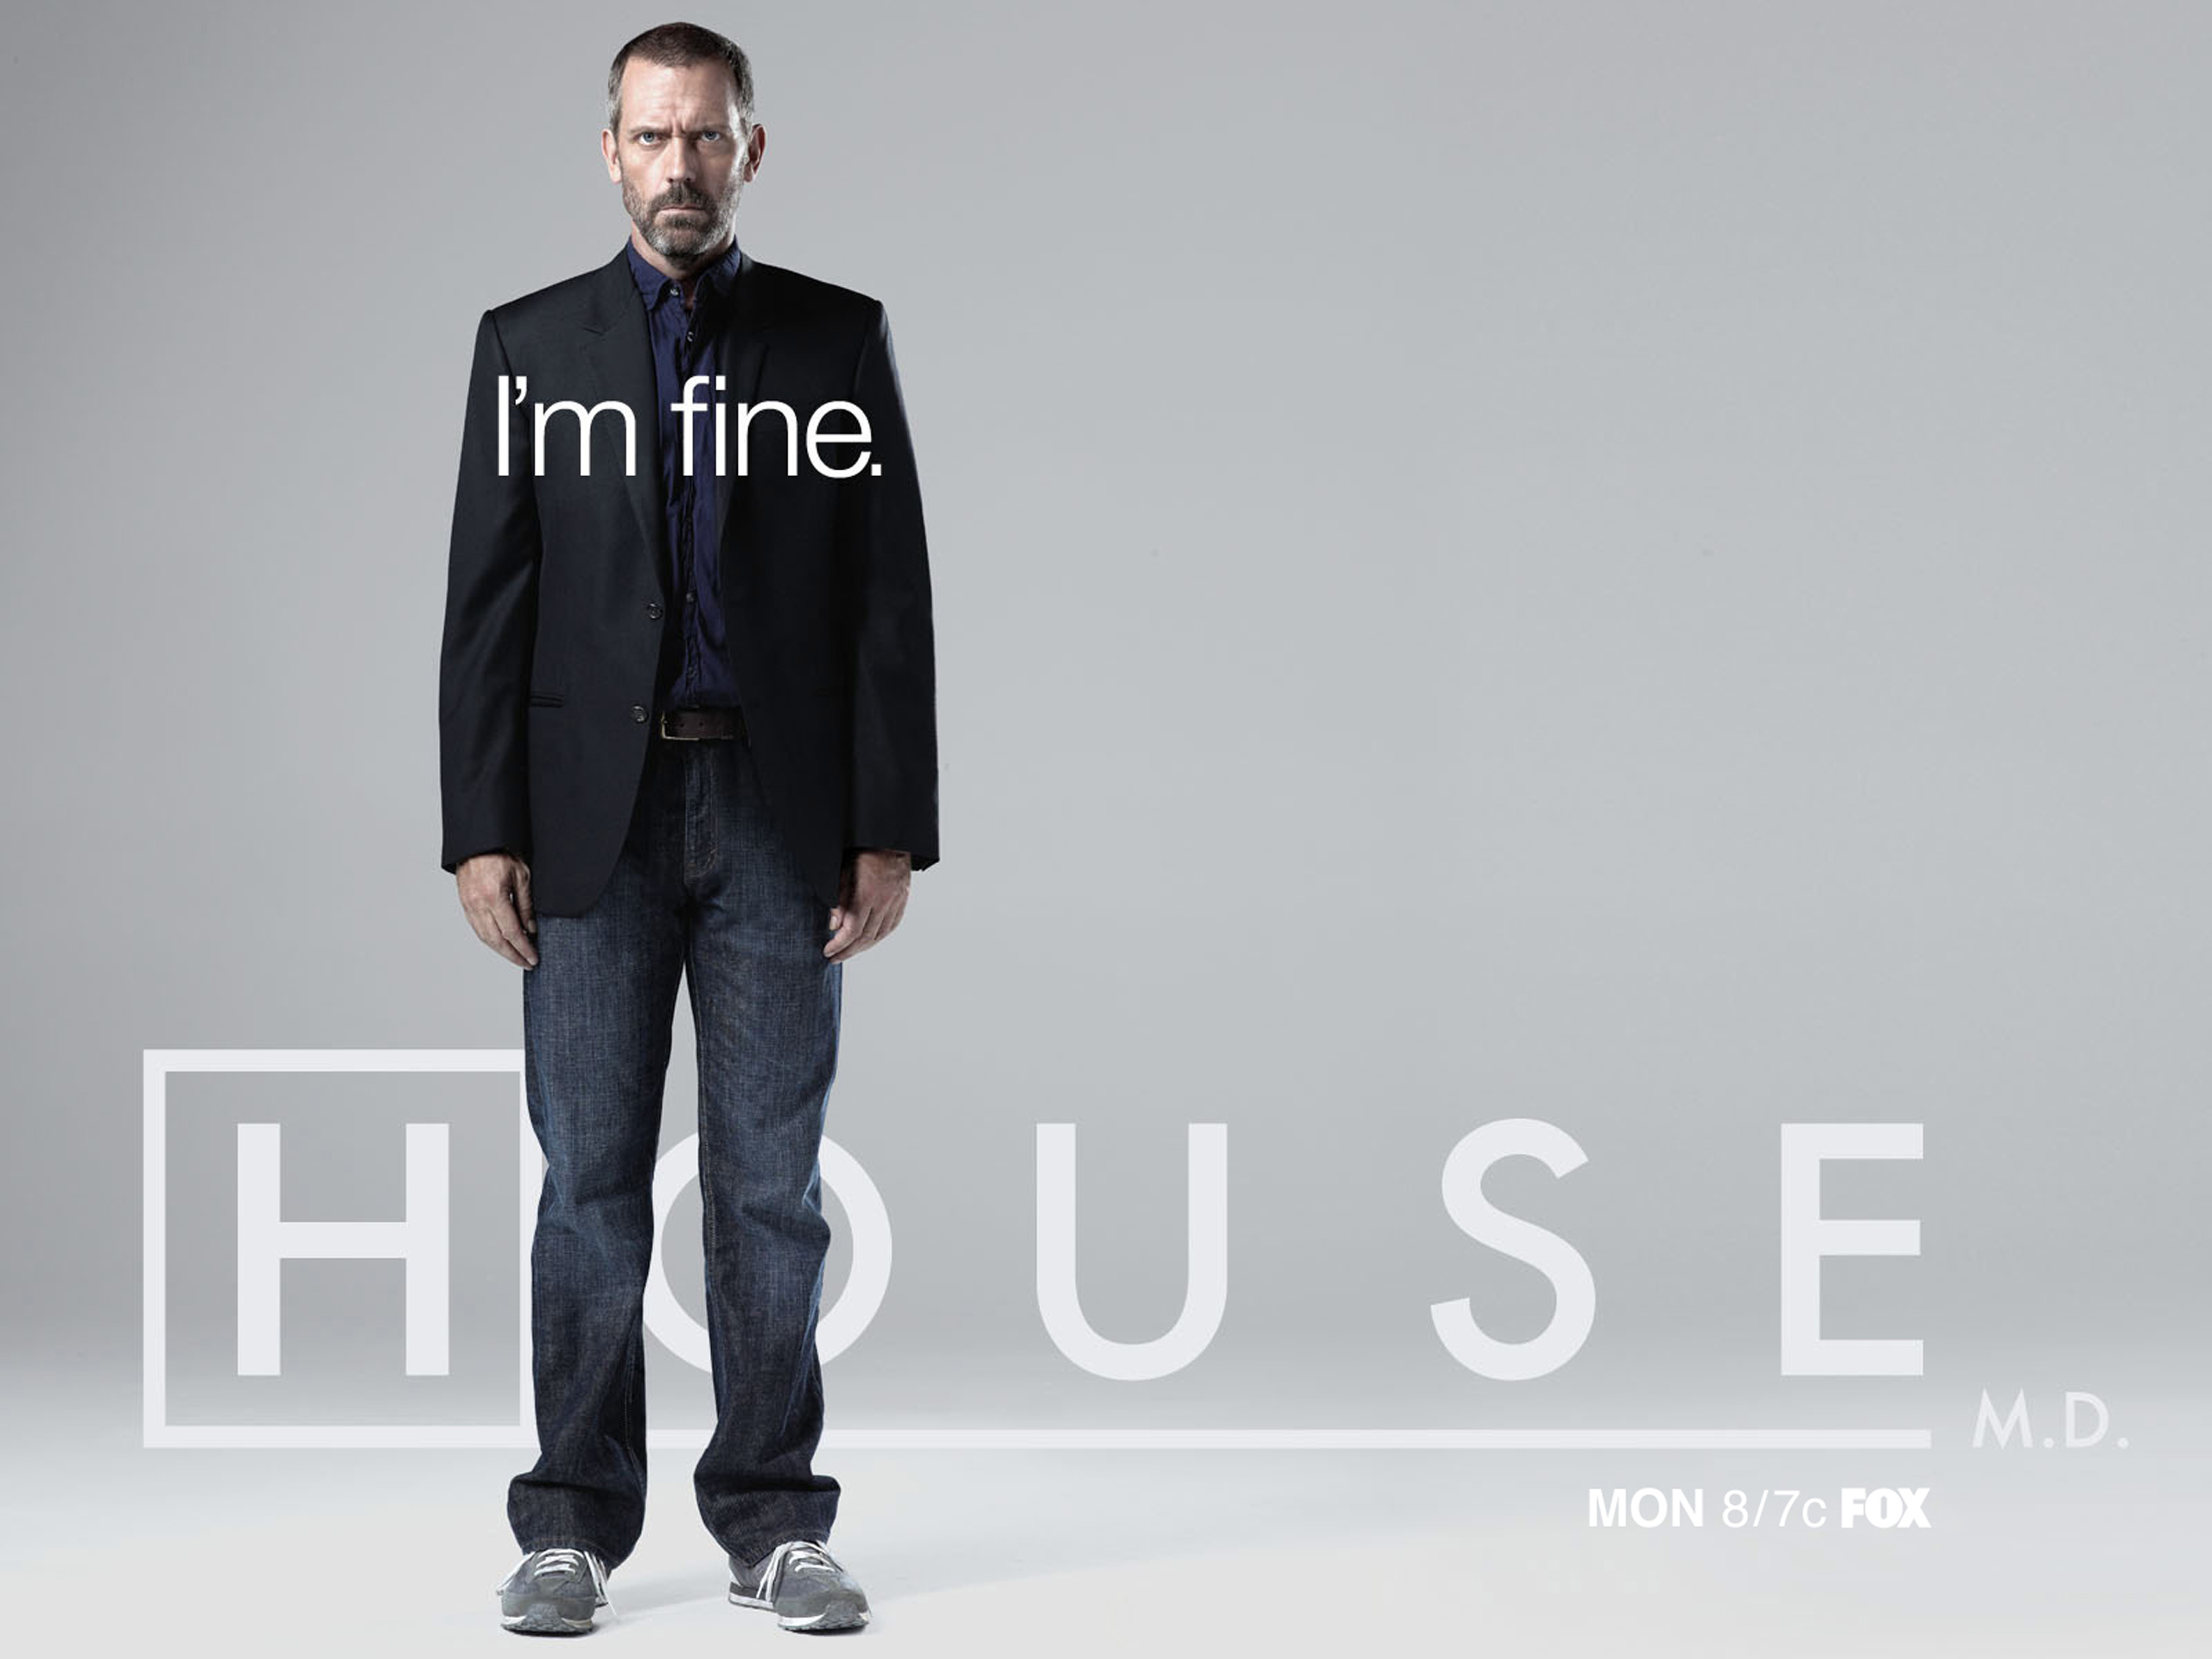 House - Im Fine - Md Gregory House Sneakers , HD Wallpaper & Backgrounds